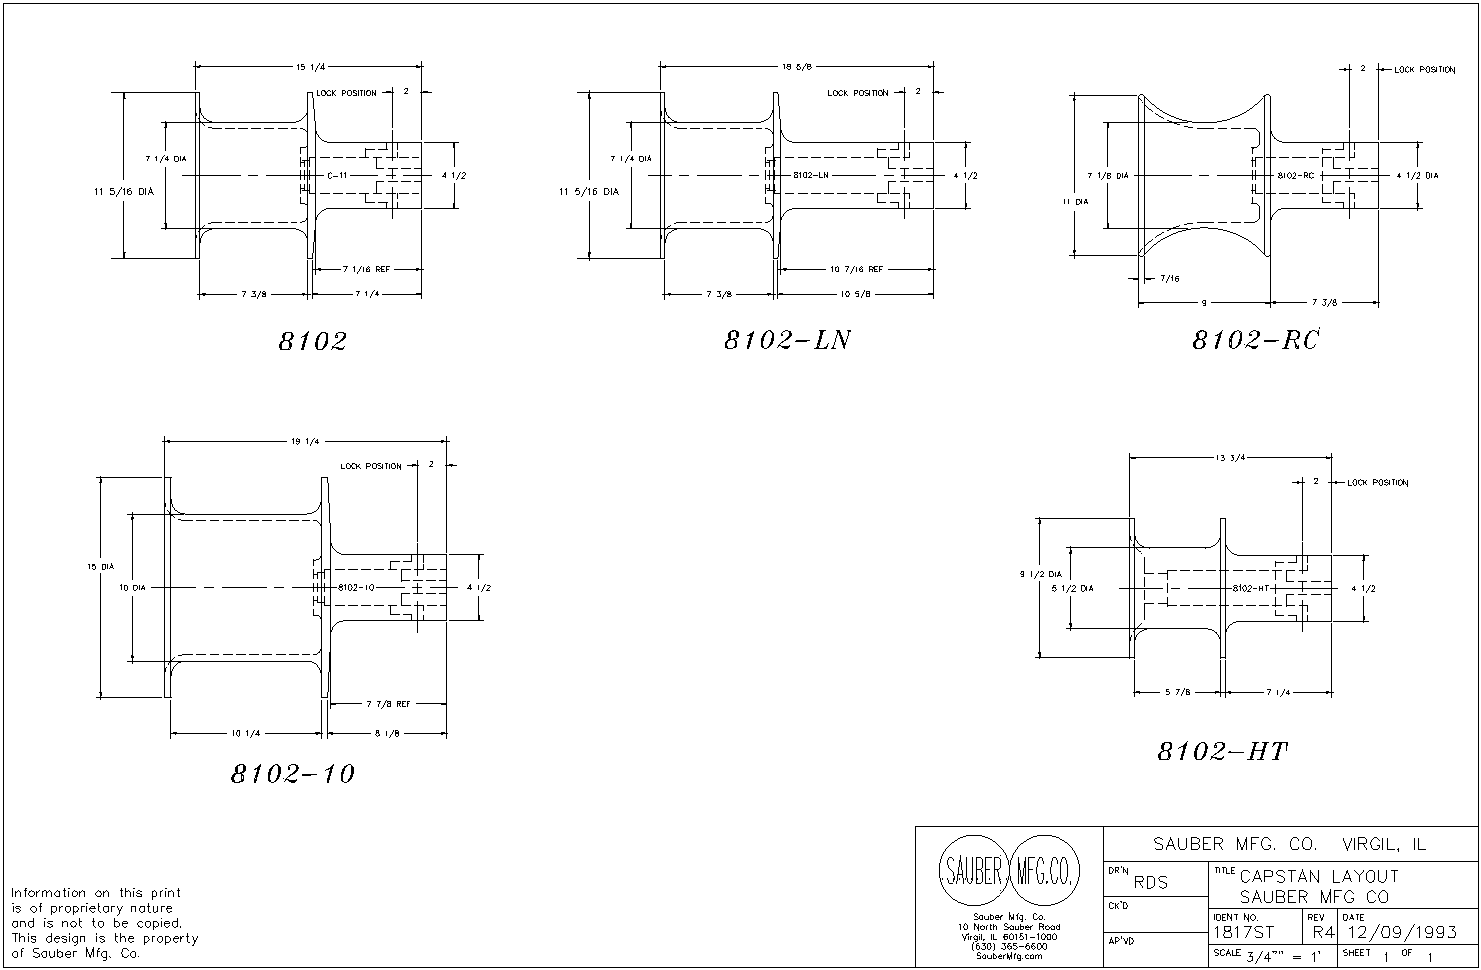 Line drawing showing a variety of Sauber Mfg. Co. Model 8102 Series Almag Capstans and their dimensions.